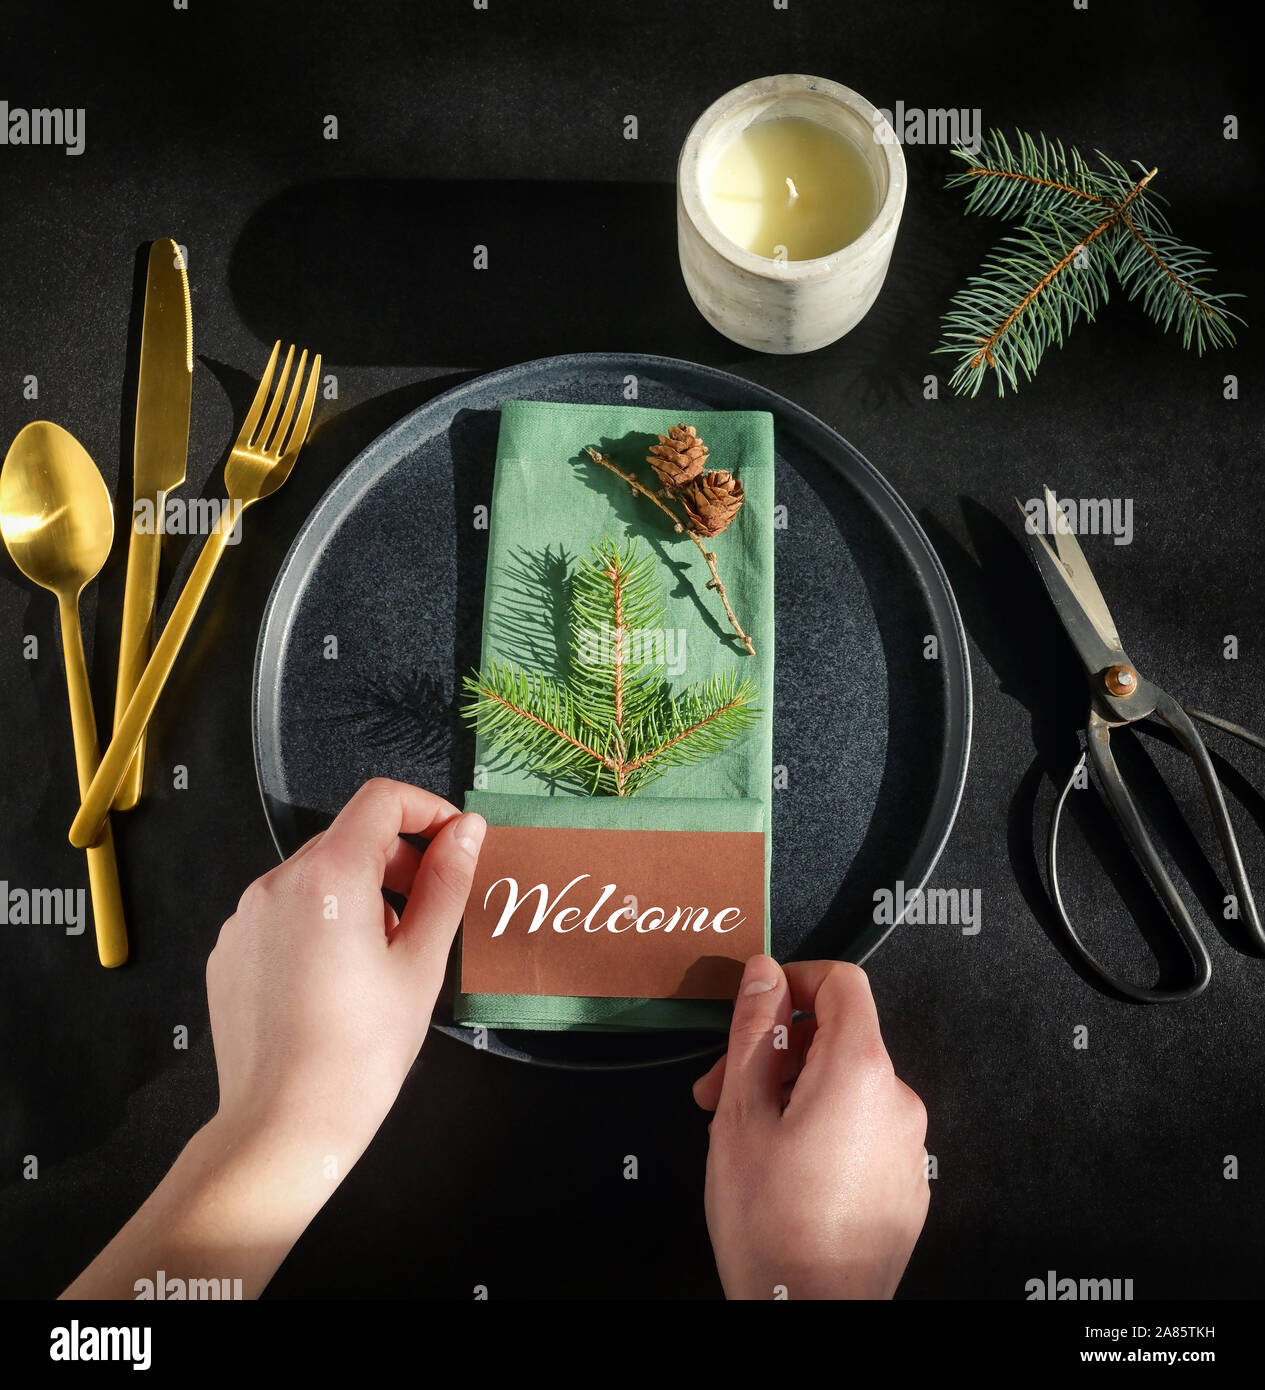 Setting A Holiday Dinner Table on Black Background Stock Photo